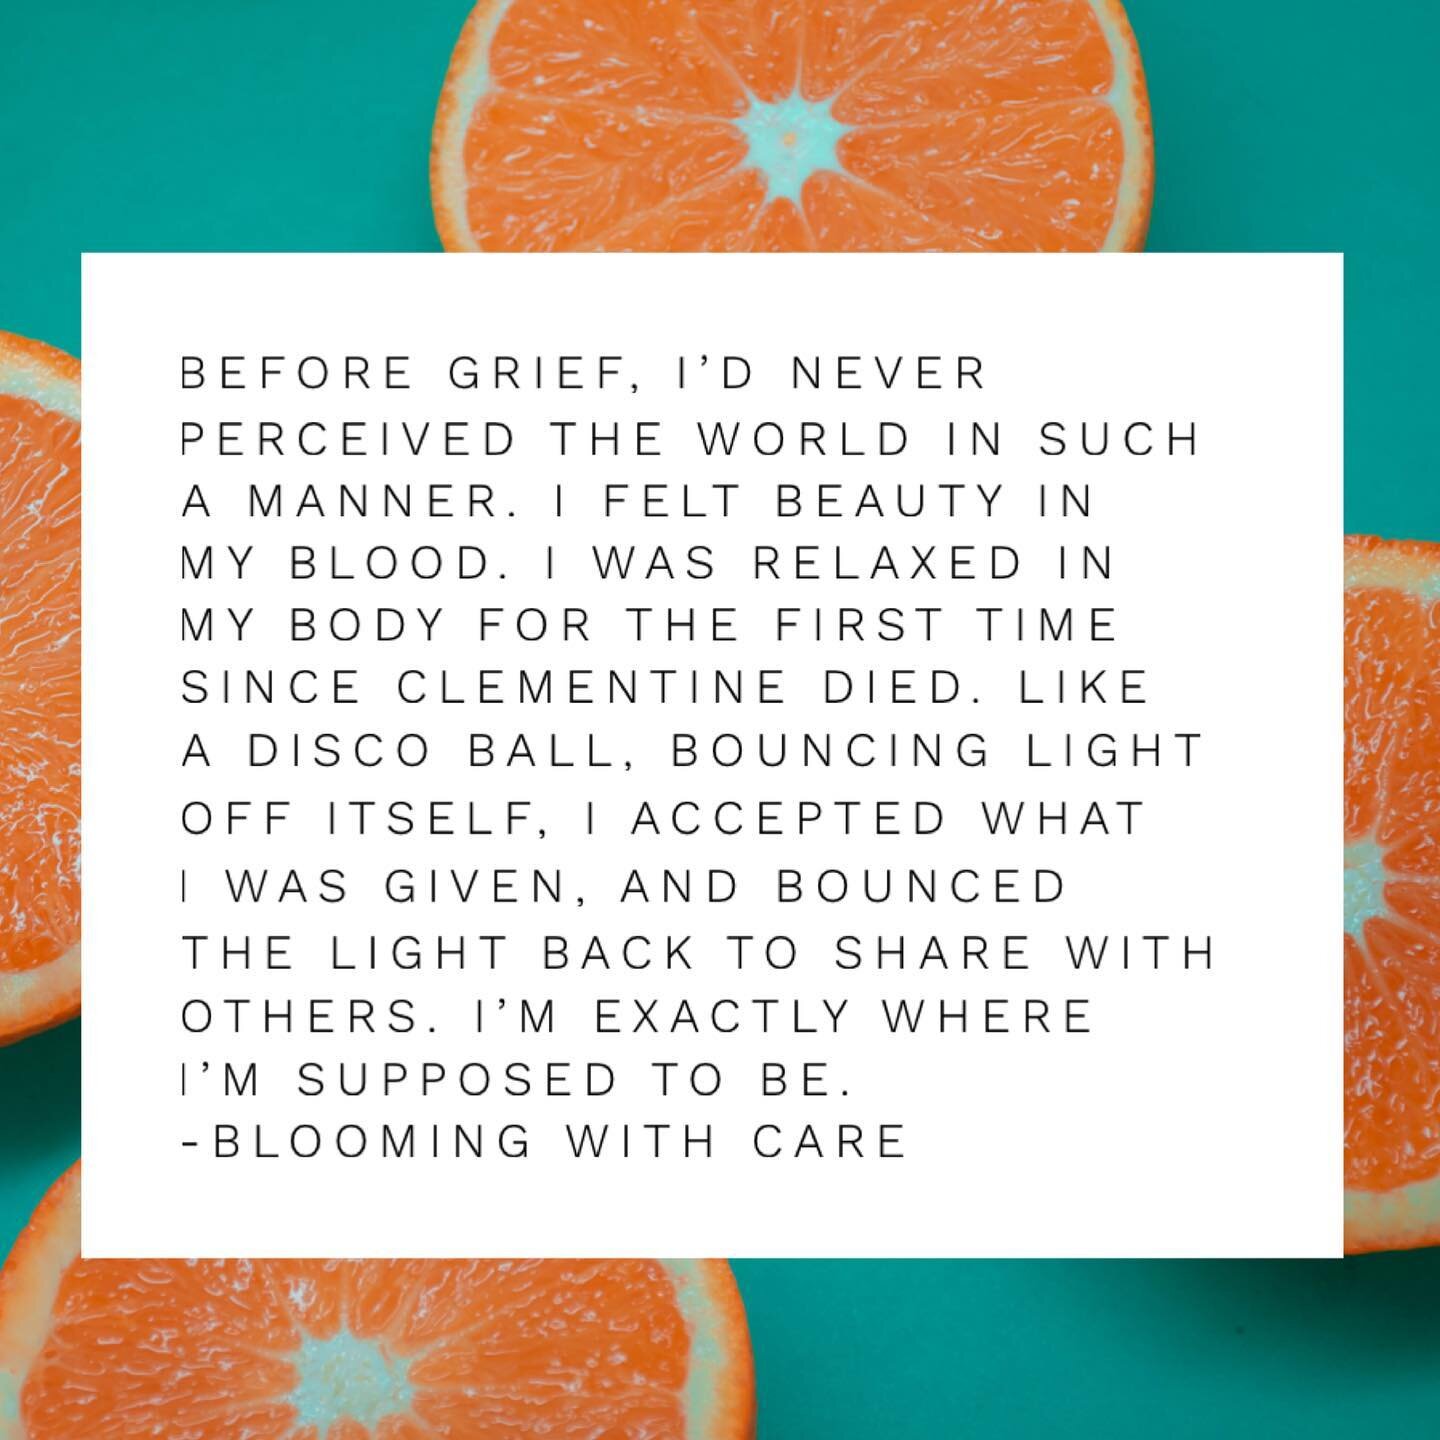 Writing about a trip to The Grand Canyon, two months after Clementine died.

I had a visceral response to seeing the sunrise that day. Nature reminded me that it&rsquo;s all connected.

The love, the sparkles, the light, it&rsquo;s all Clementine.
🪩